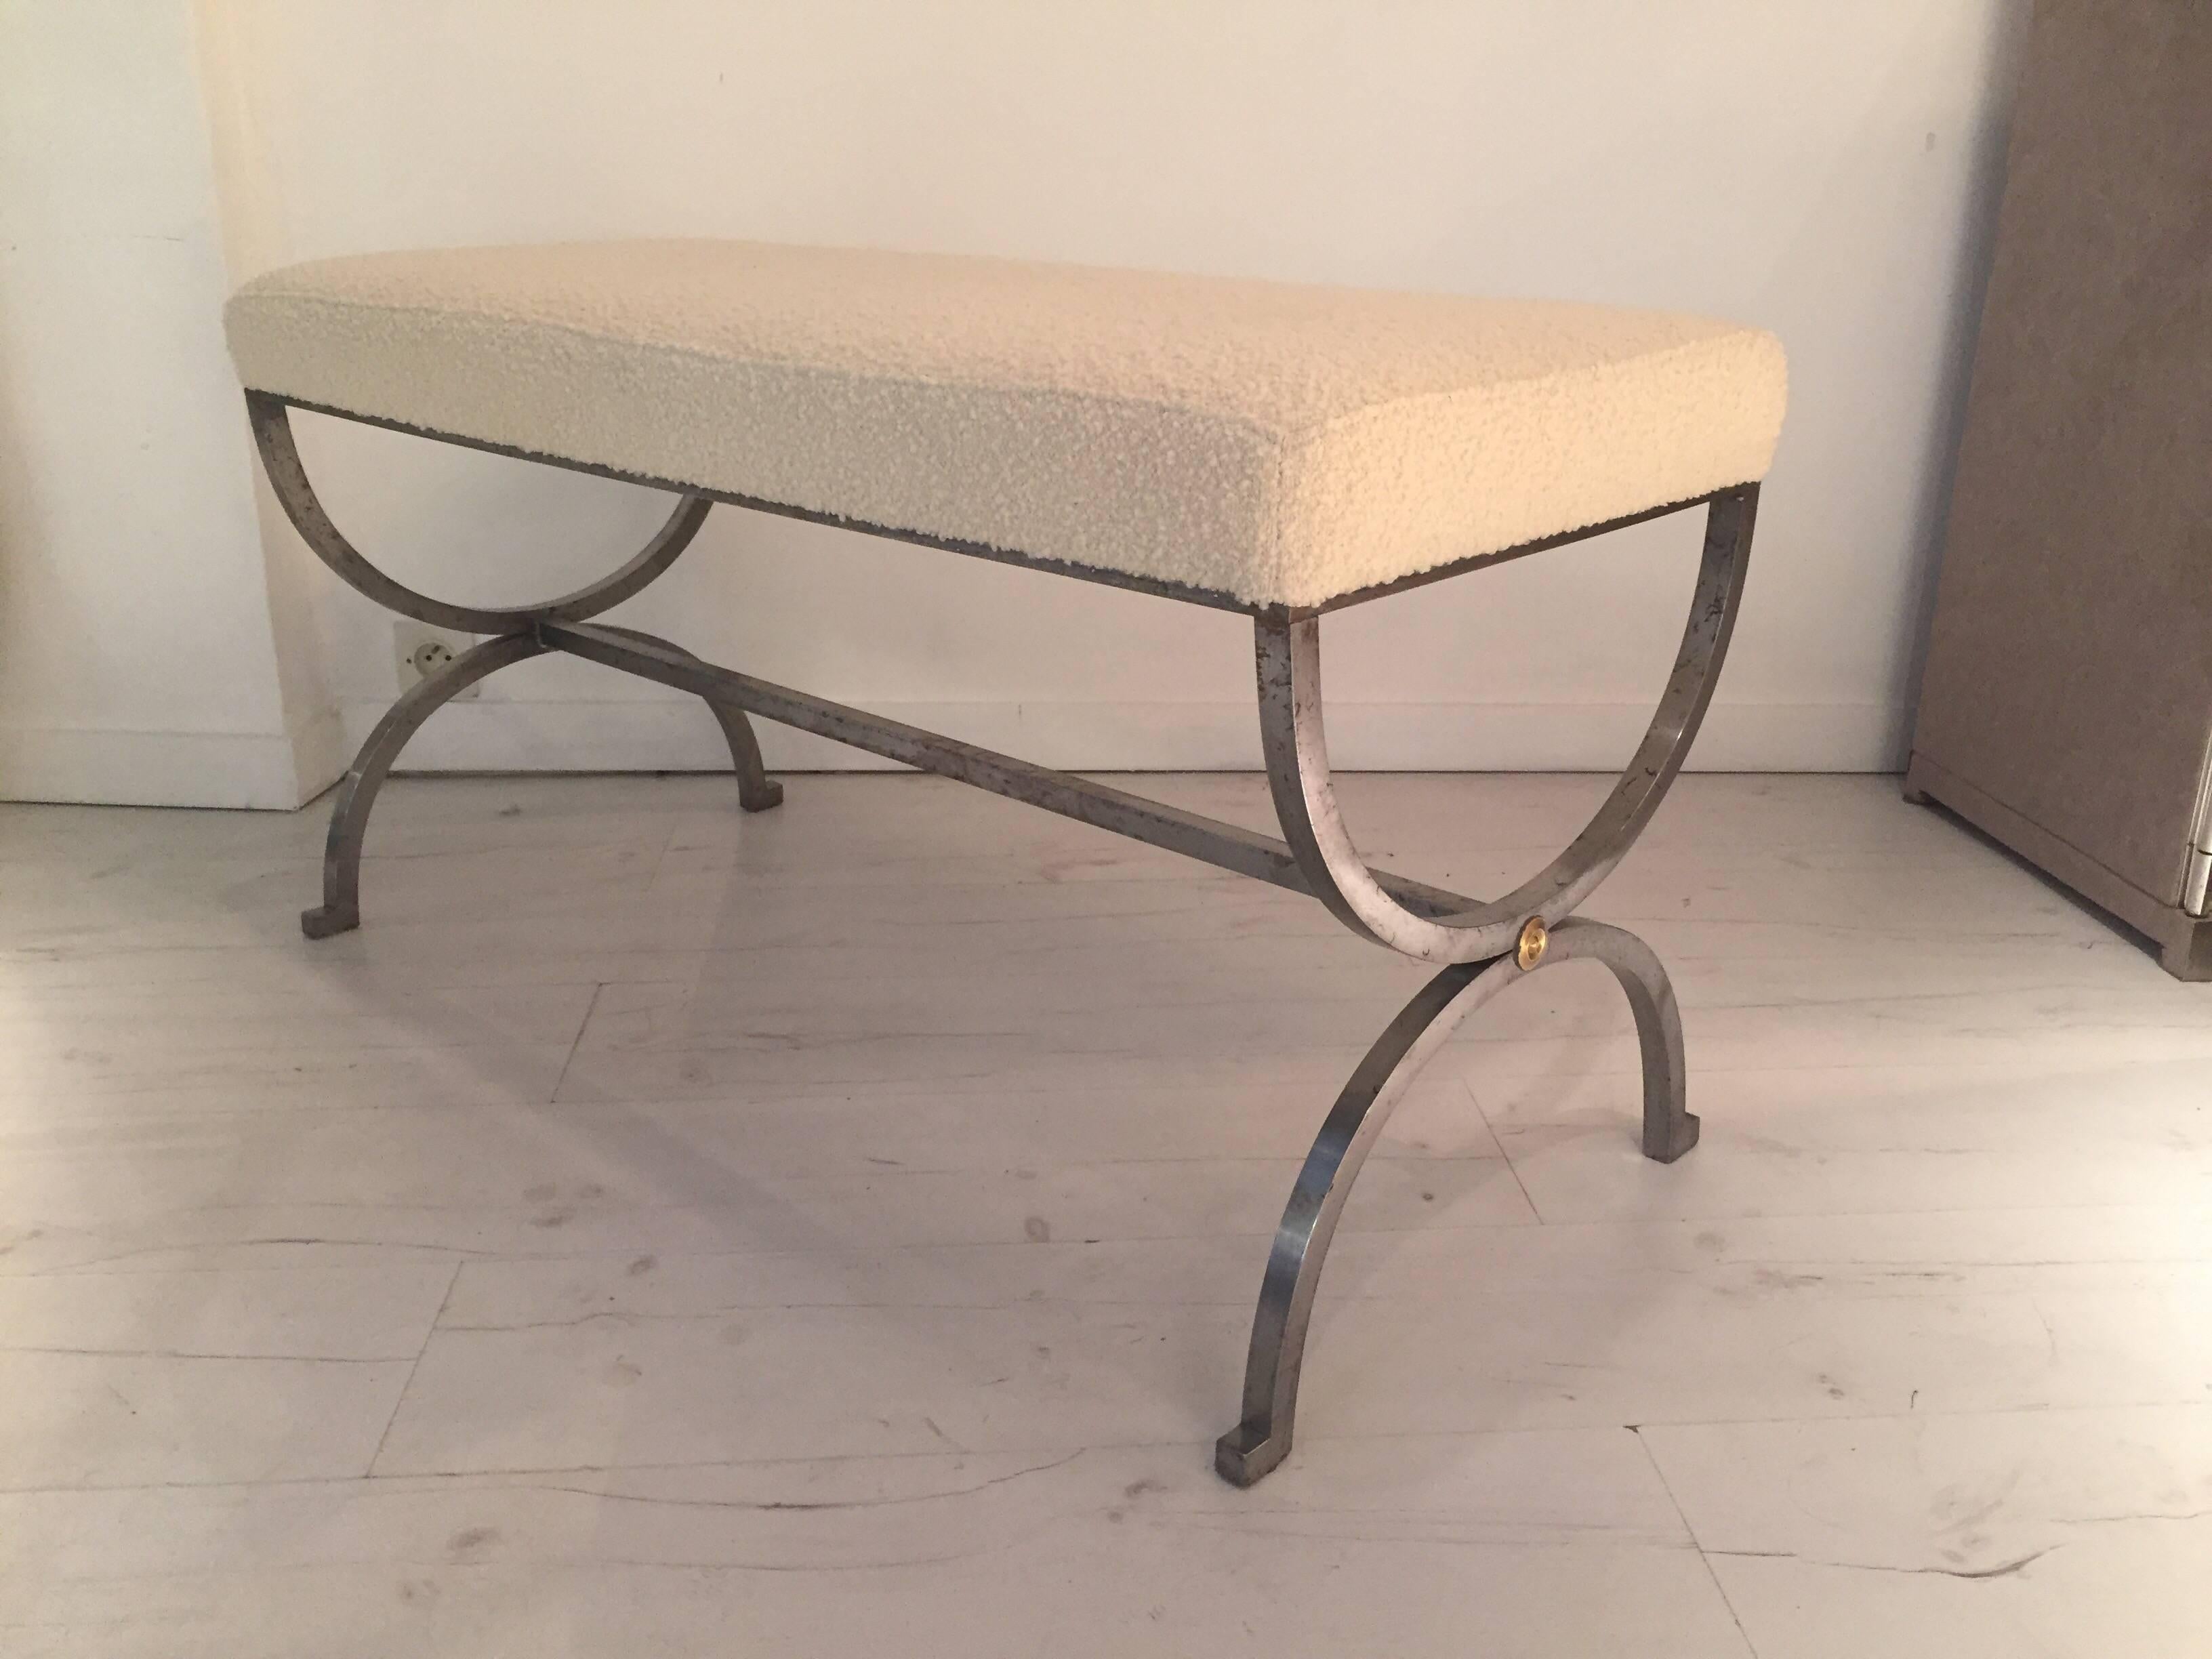 1960s steel and brass bench by Maison Jansen
New upholstered with Maison Bisson Brunel fabric.